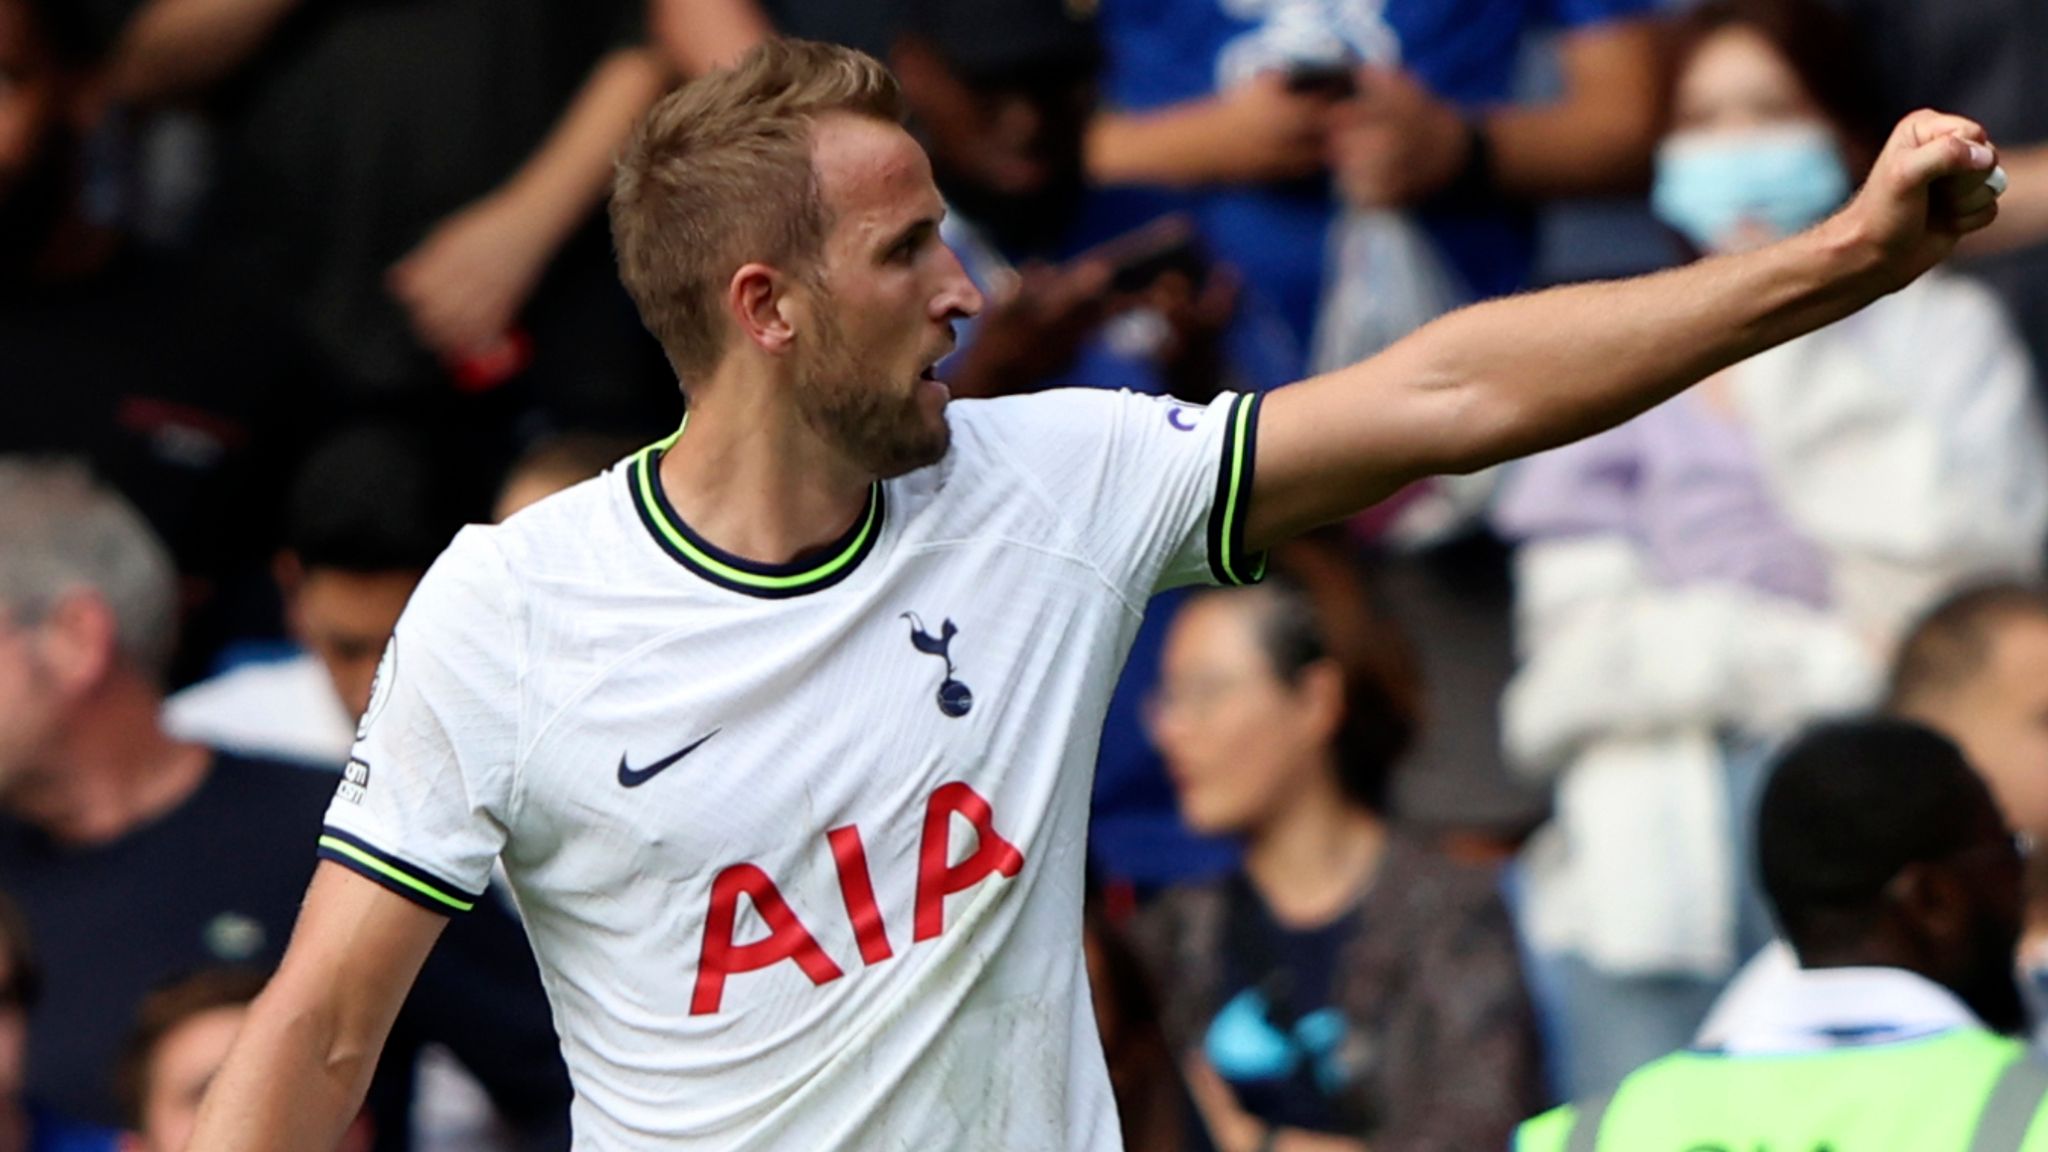 Tottenham vs Sheffield United LIVE! Premier League: commentary, updates and  free match highlights, Football News